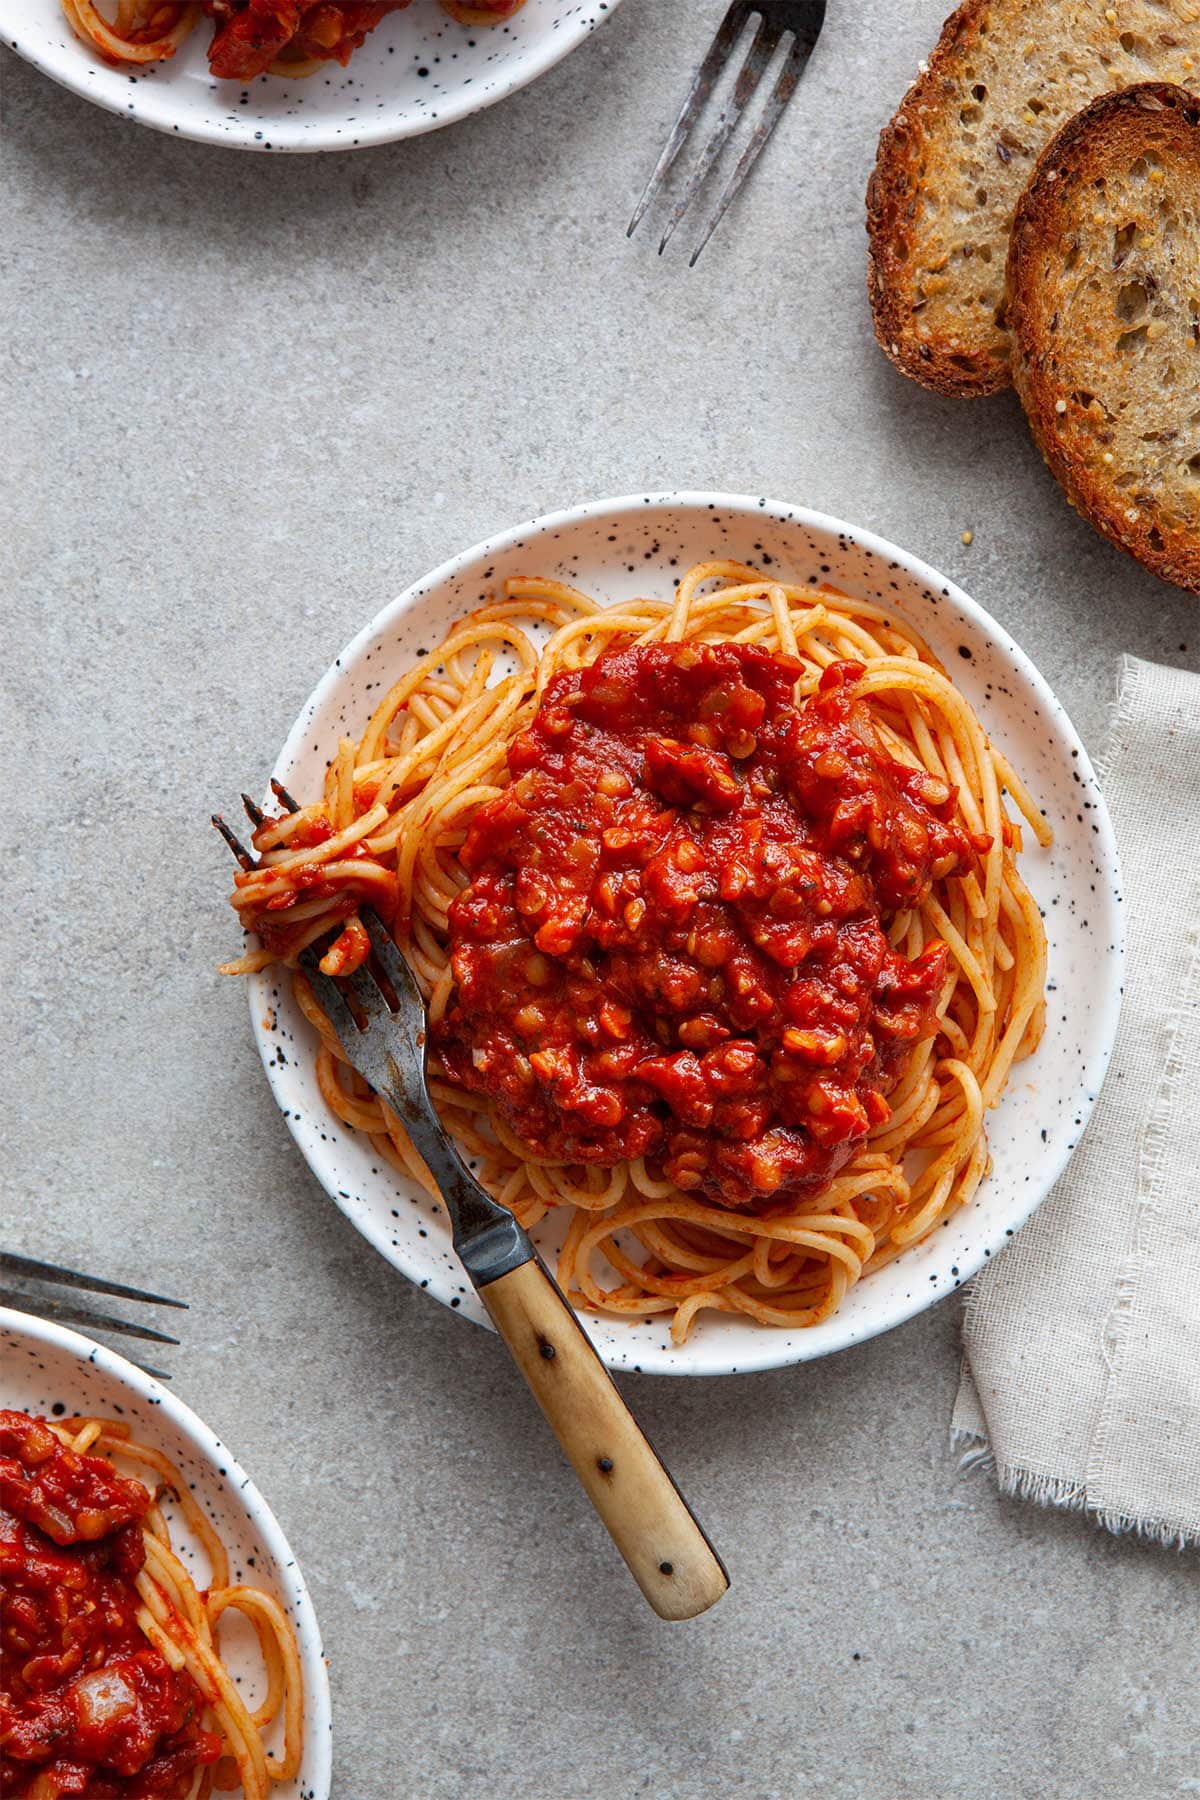 Three plates of spaghetti topped with sauce with toasted bread nearby.